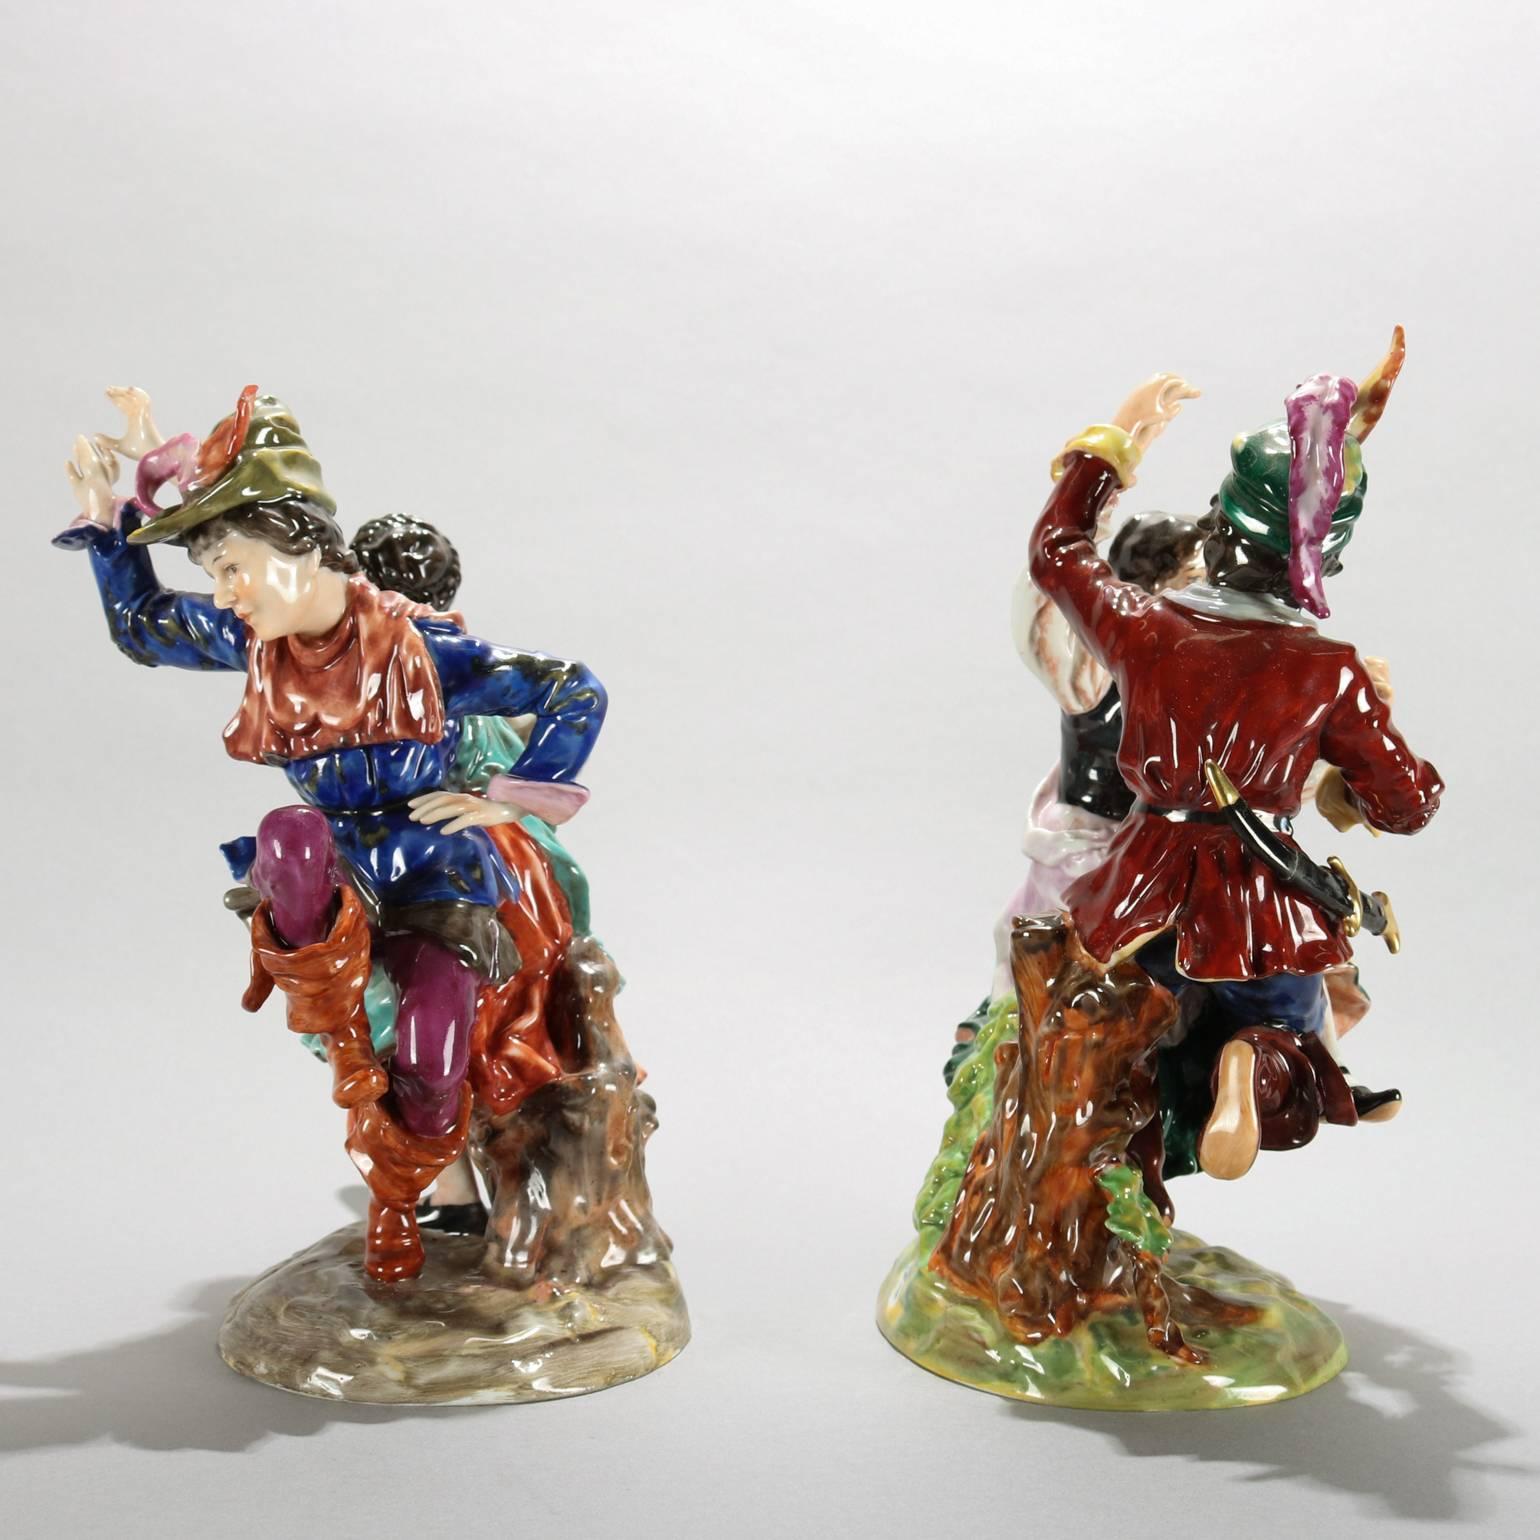 Set of two antique hand-painted German Dresden porcelain figurines of old world couples celebrating and dancing, circa 1850

Measure: 9" H x 7" W x 4.5" D.